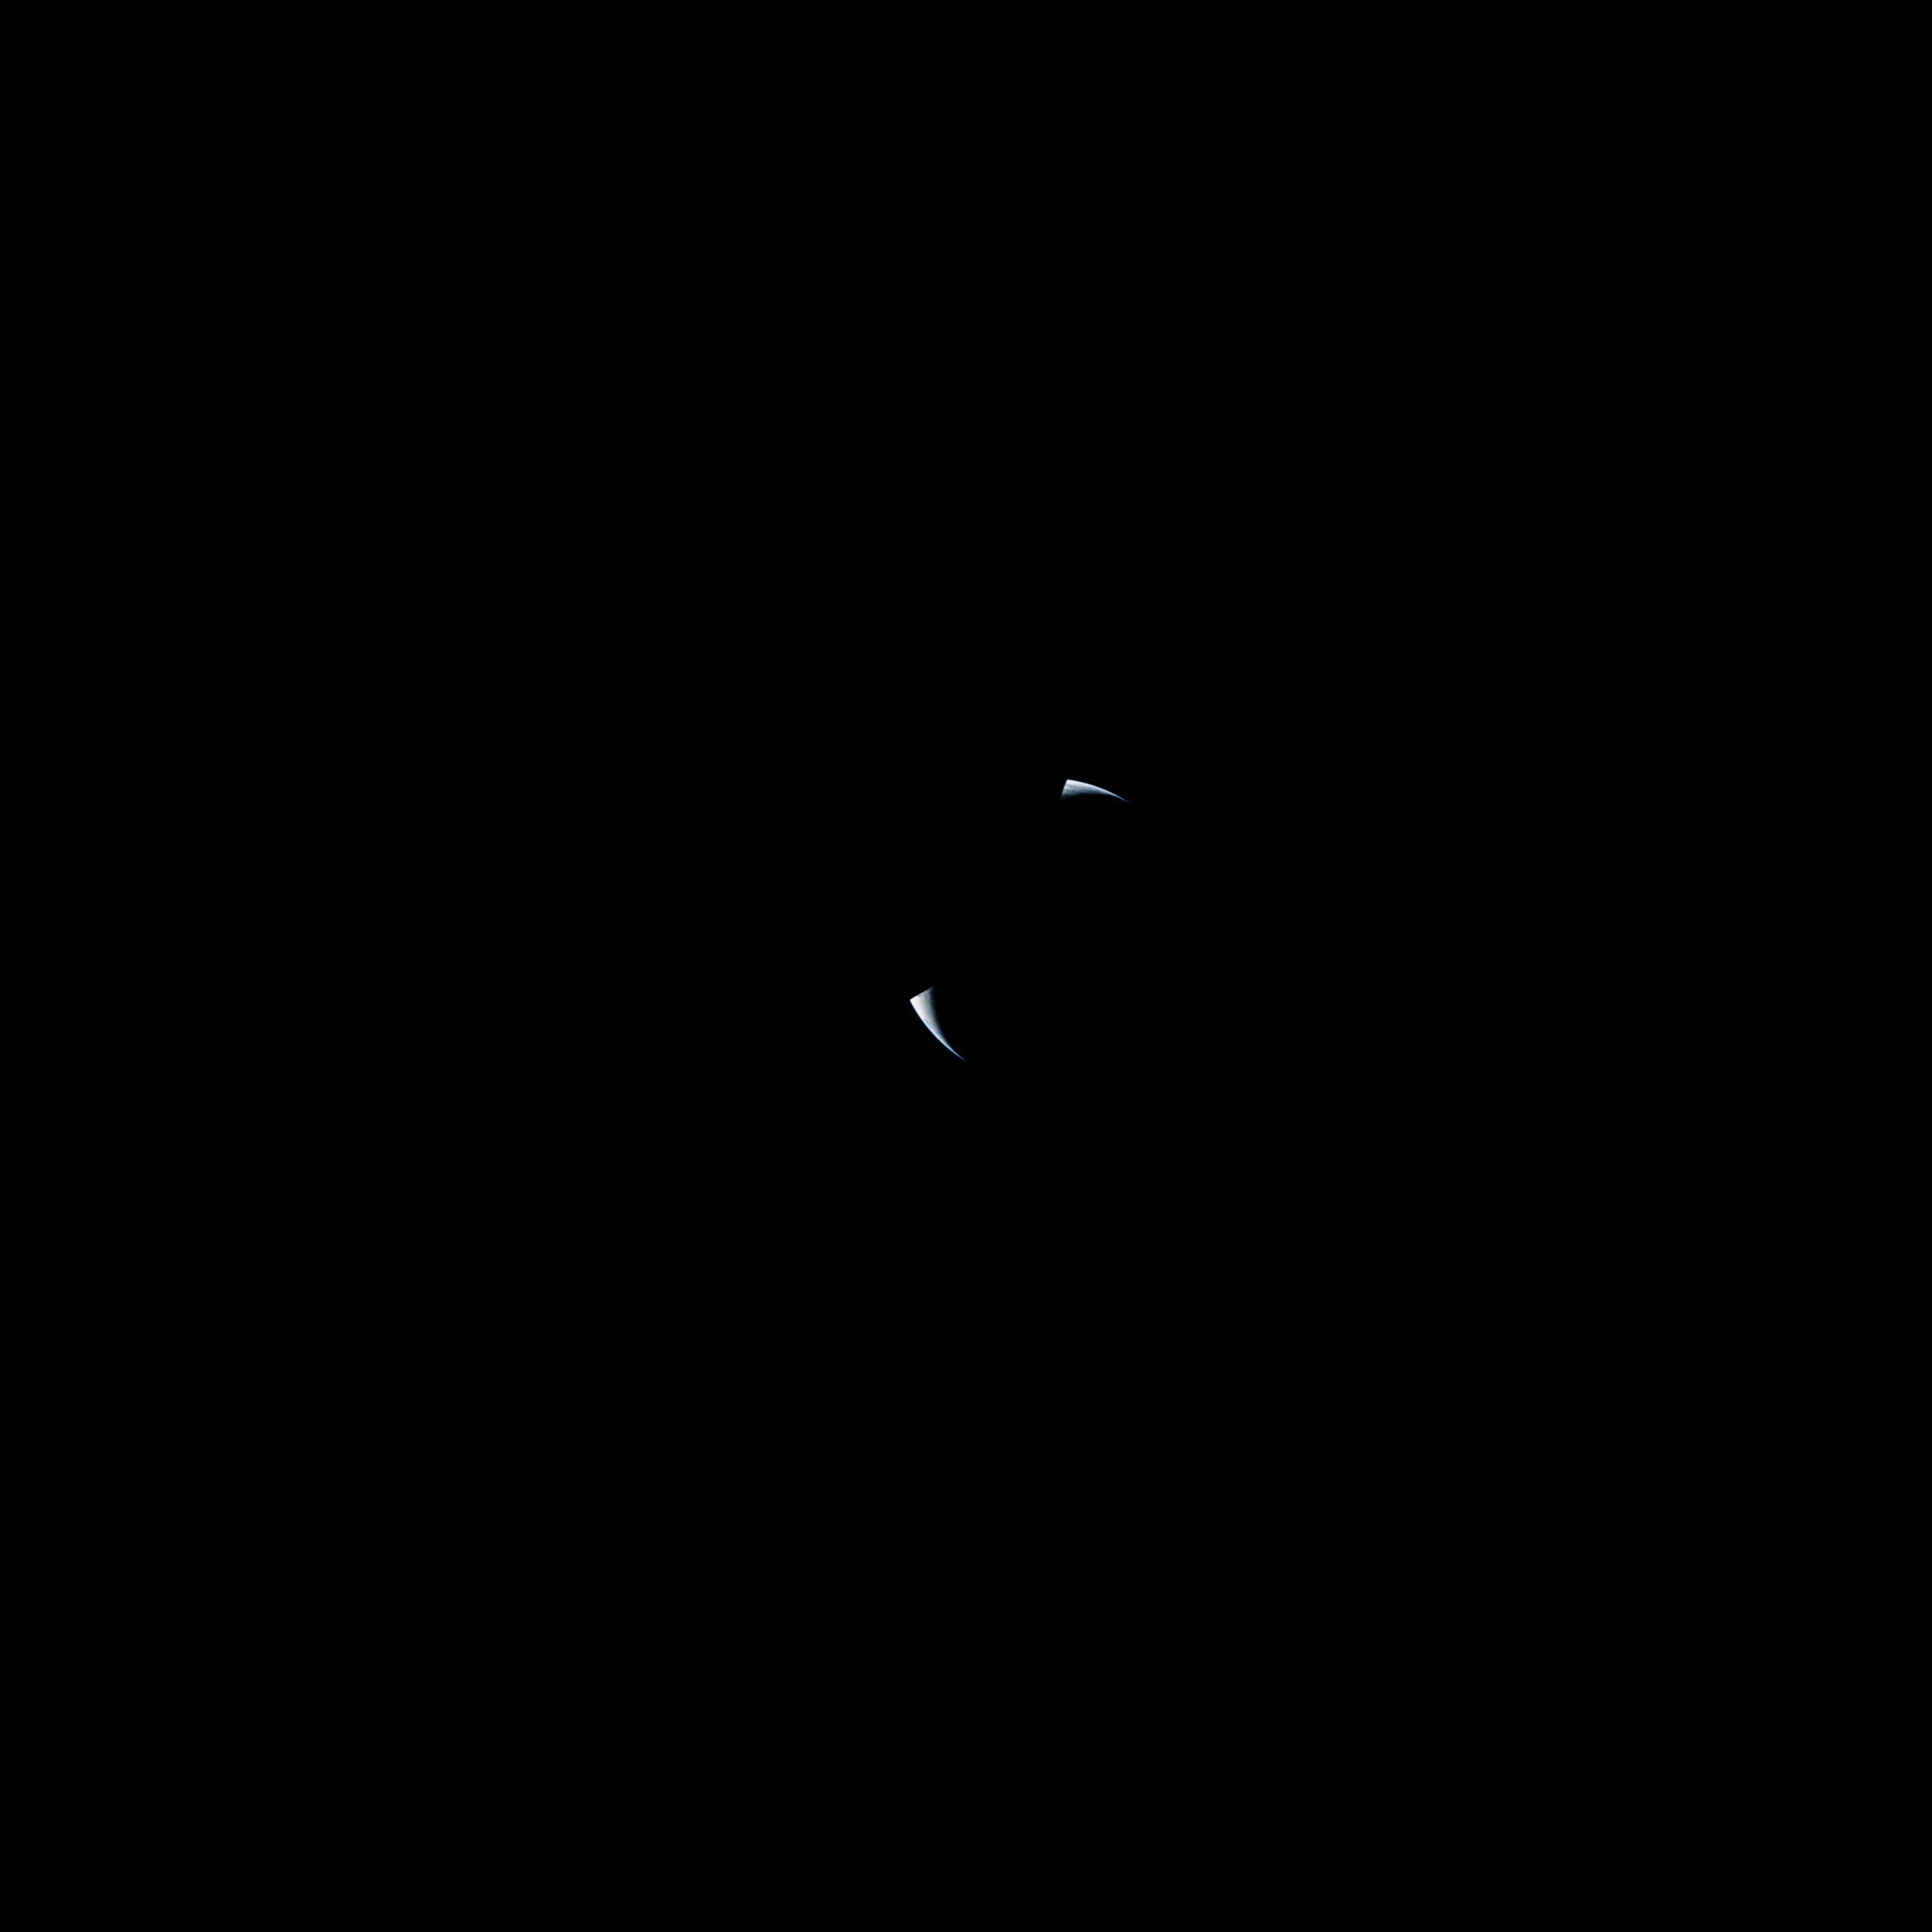  Apollo 17  A rare sequence capturing an earthset. The Earth disappears behind an unlit lunar horizon—consumed in the darkness.   Full Resolution   Date – ~15:25 UTC, 16 December 1972 Lens – Zeiss Sonnar ƒ-5.6/250mm Code – AS17-152-23281 Scan – LPI (